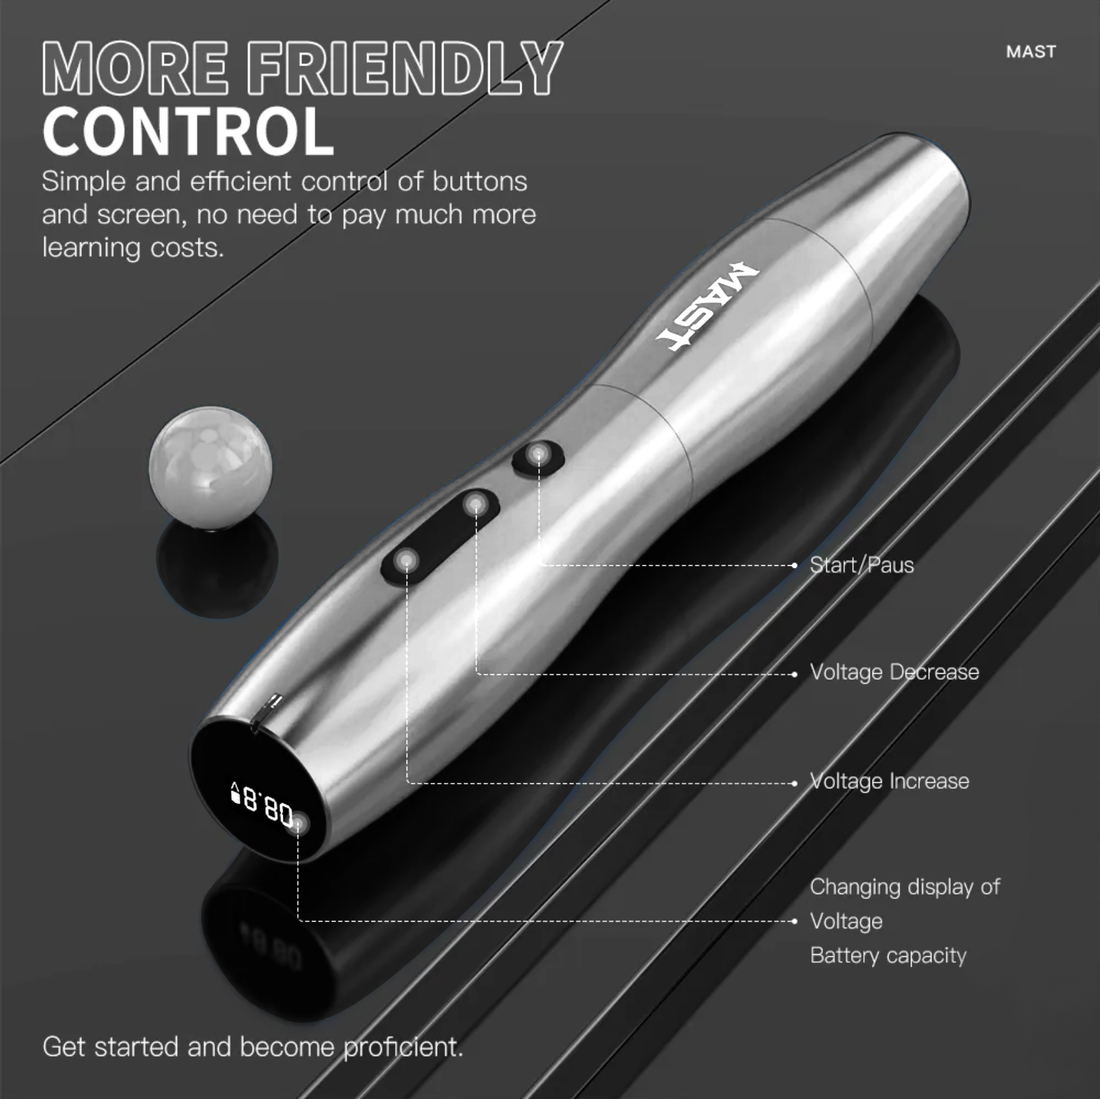 Copy of MAST P20 Wireless Tattoo Pen Silver + 1 Extra Battery 2.5MM Stroke Permanent Makeup